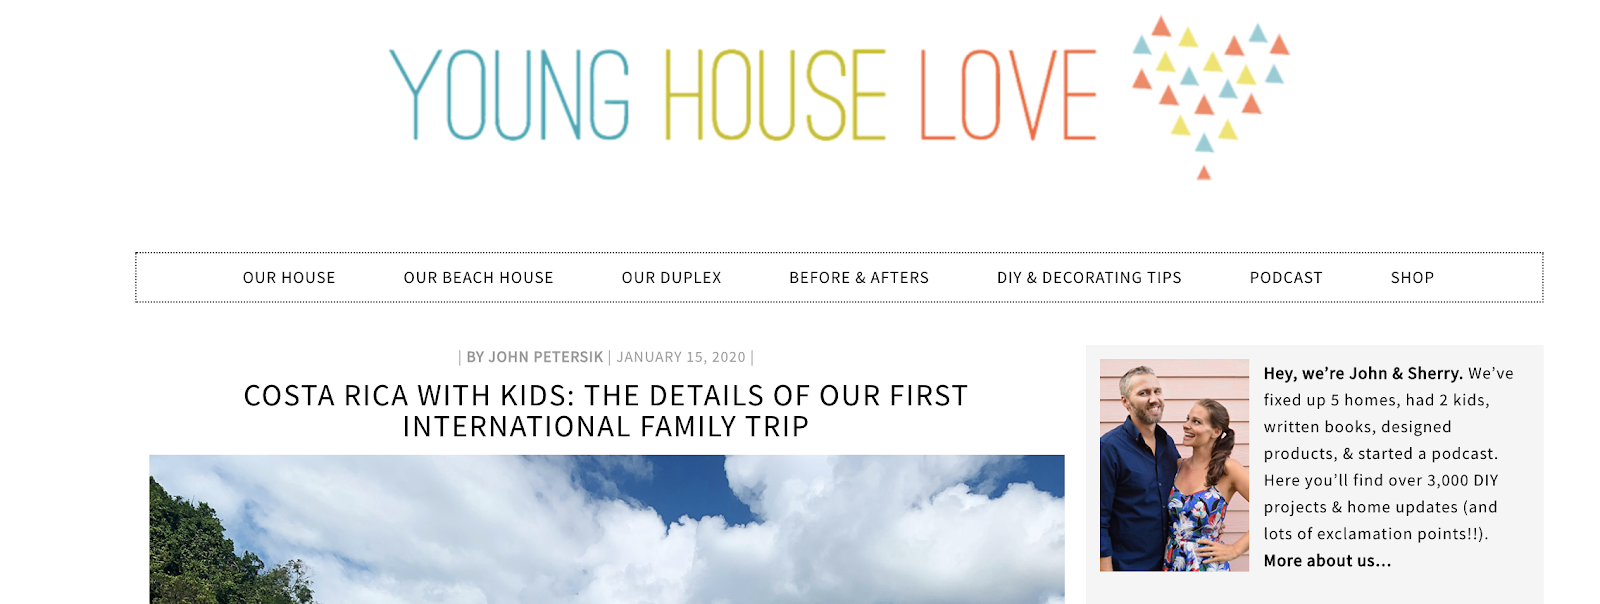 Young House Love Homepage and Blog Niche Example